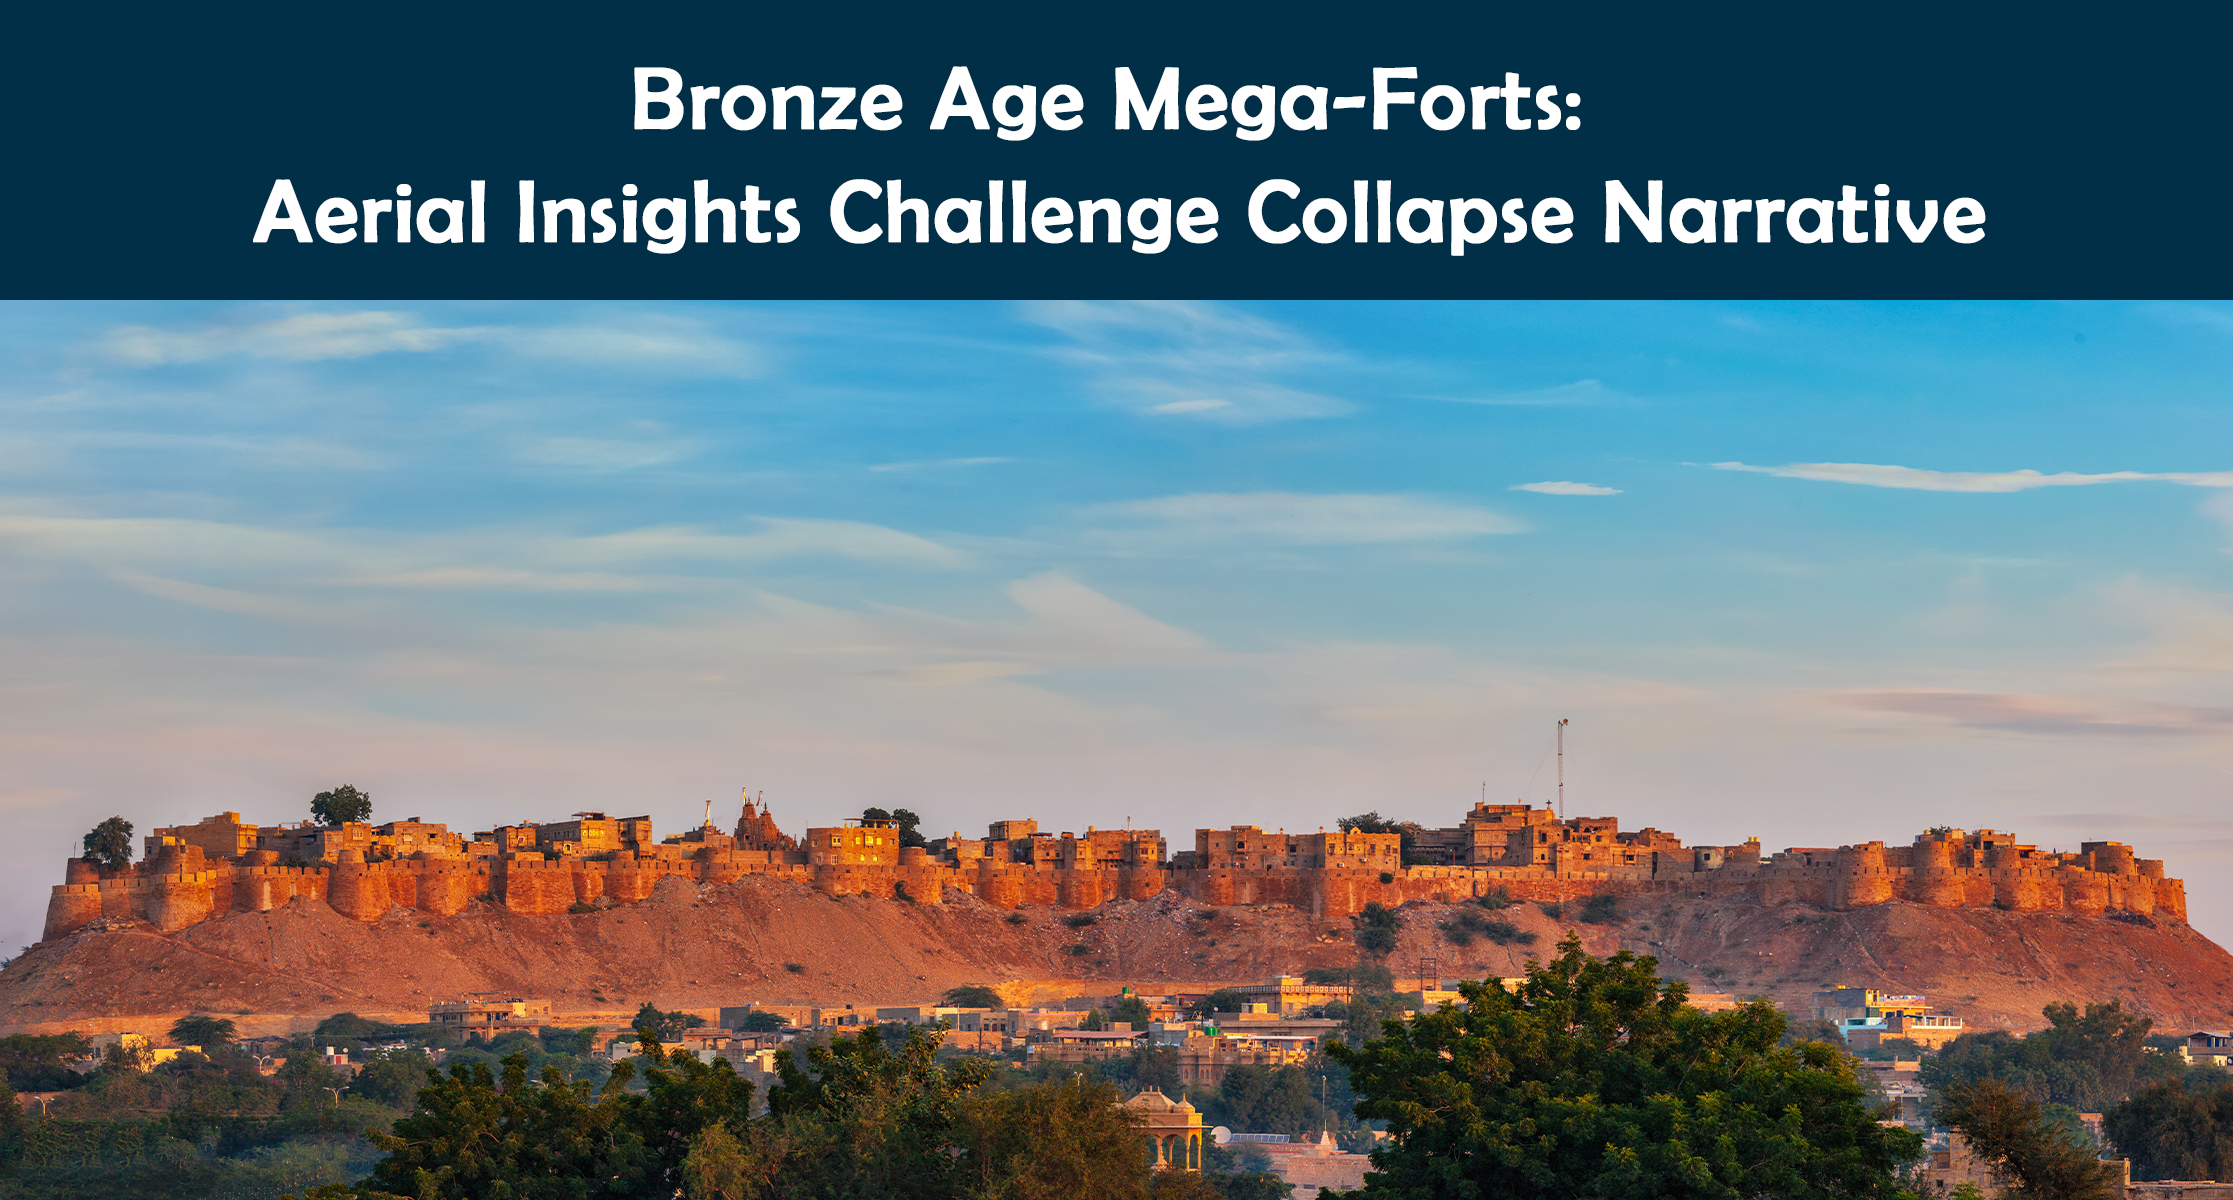 Bronze Age Mega-Forts: Aerial Insights Challenge Collapse Narrative